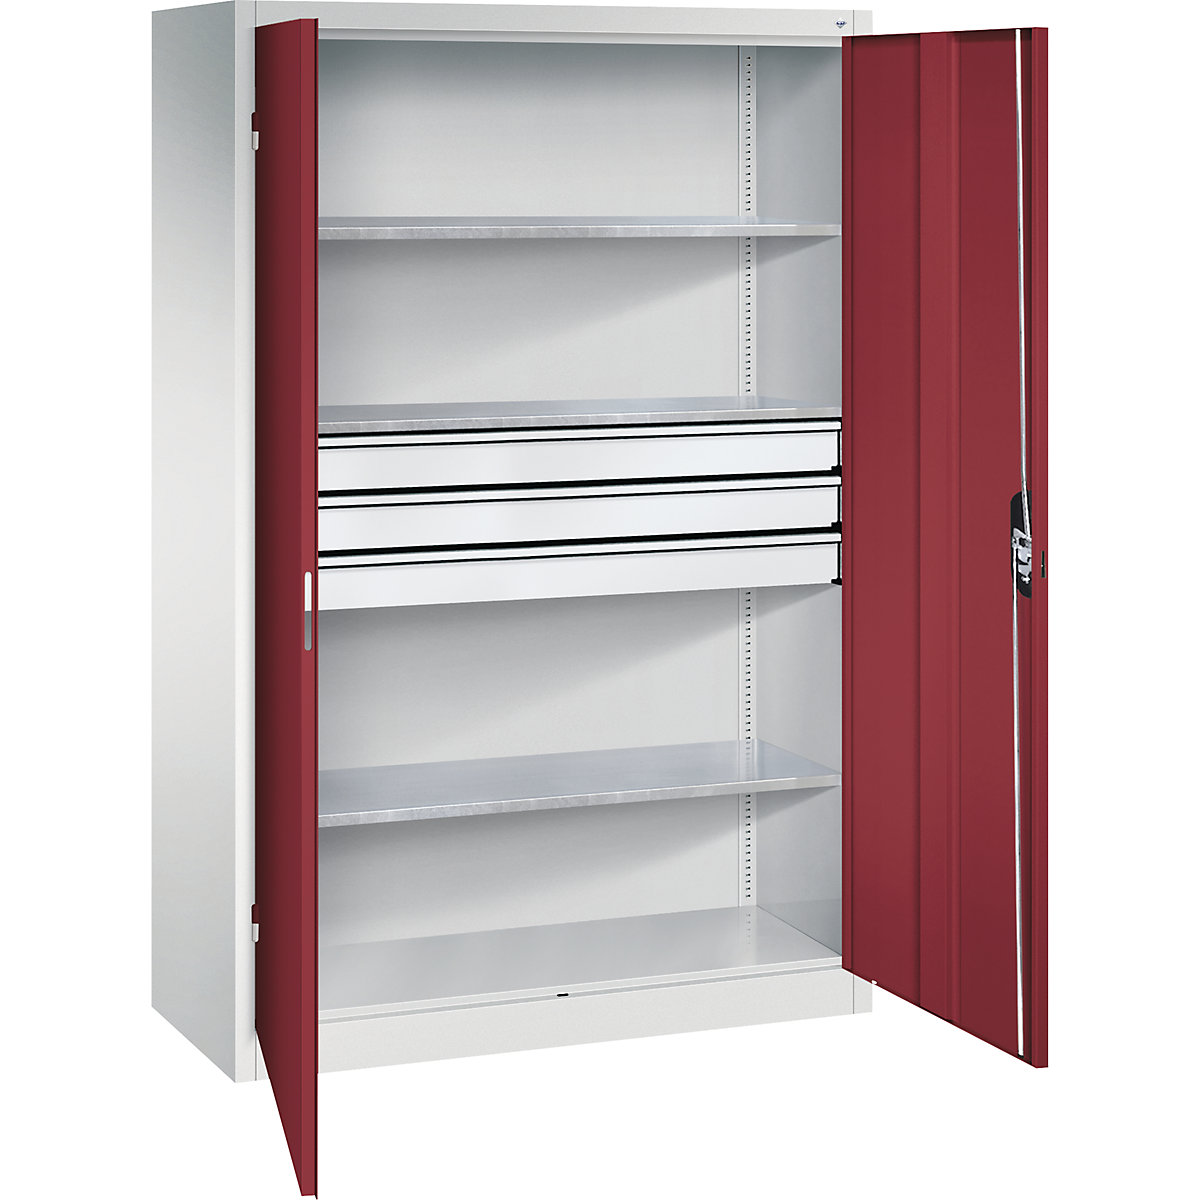 Double door workshop cupboard with drawers – C+P, WxD 1200 x 500 mm, 3 shelves, light grey / ruby red-6